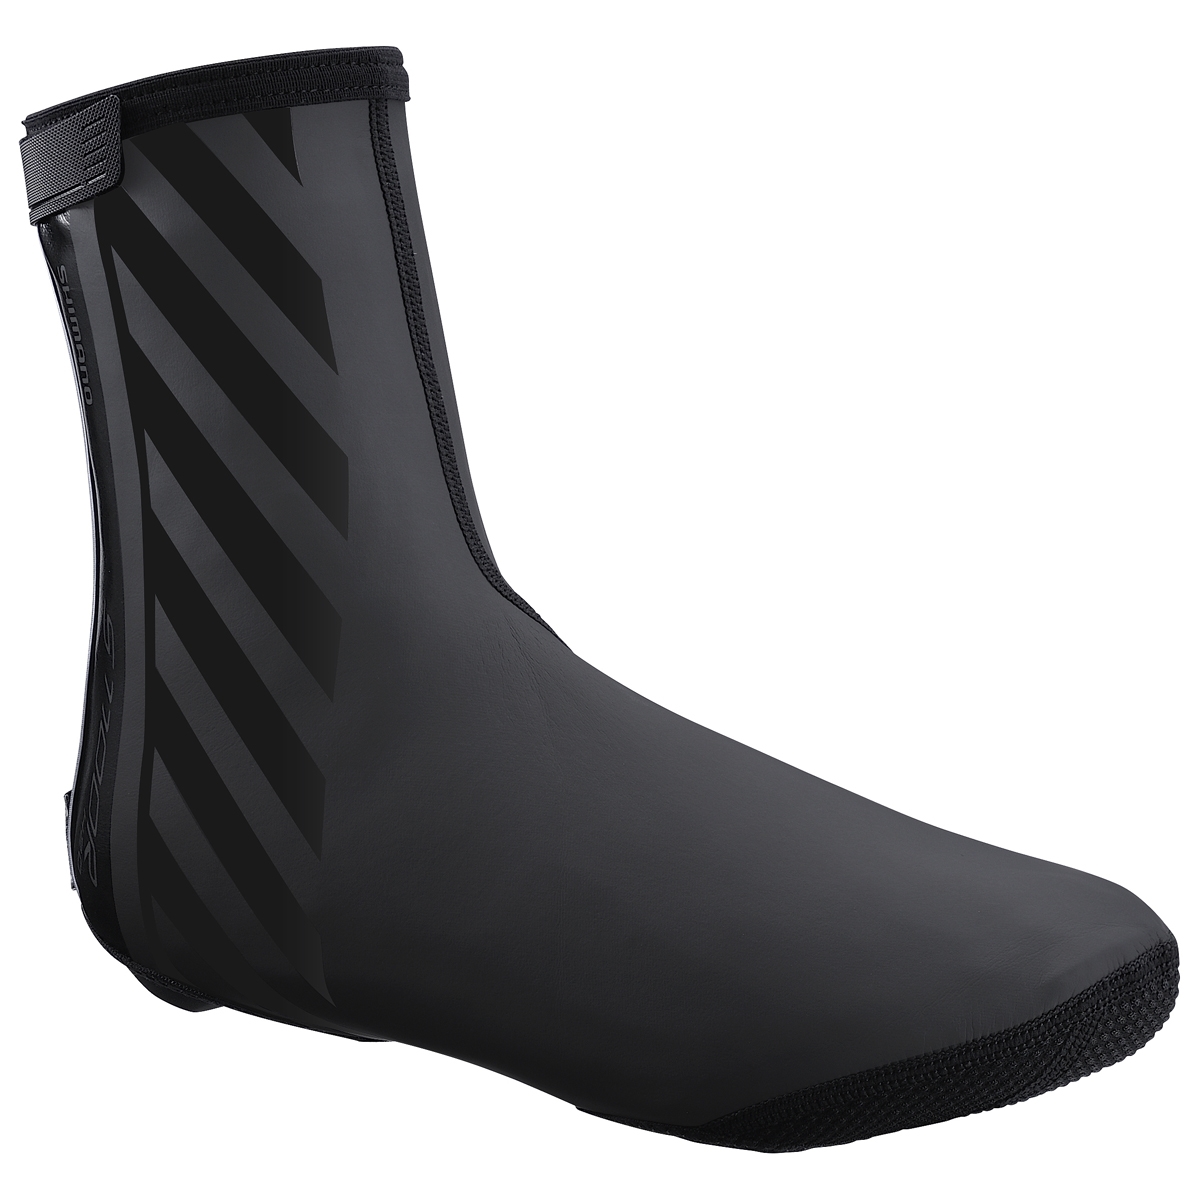 Shoe covers road S1100R H2O black size S (37-40)